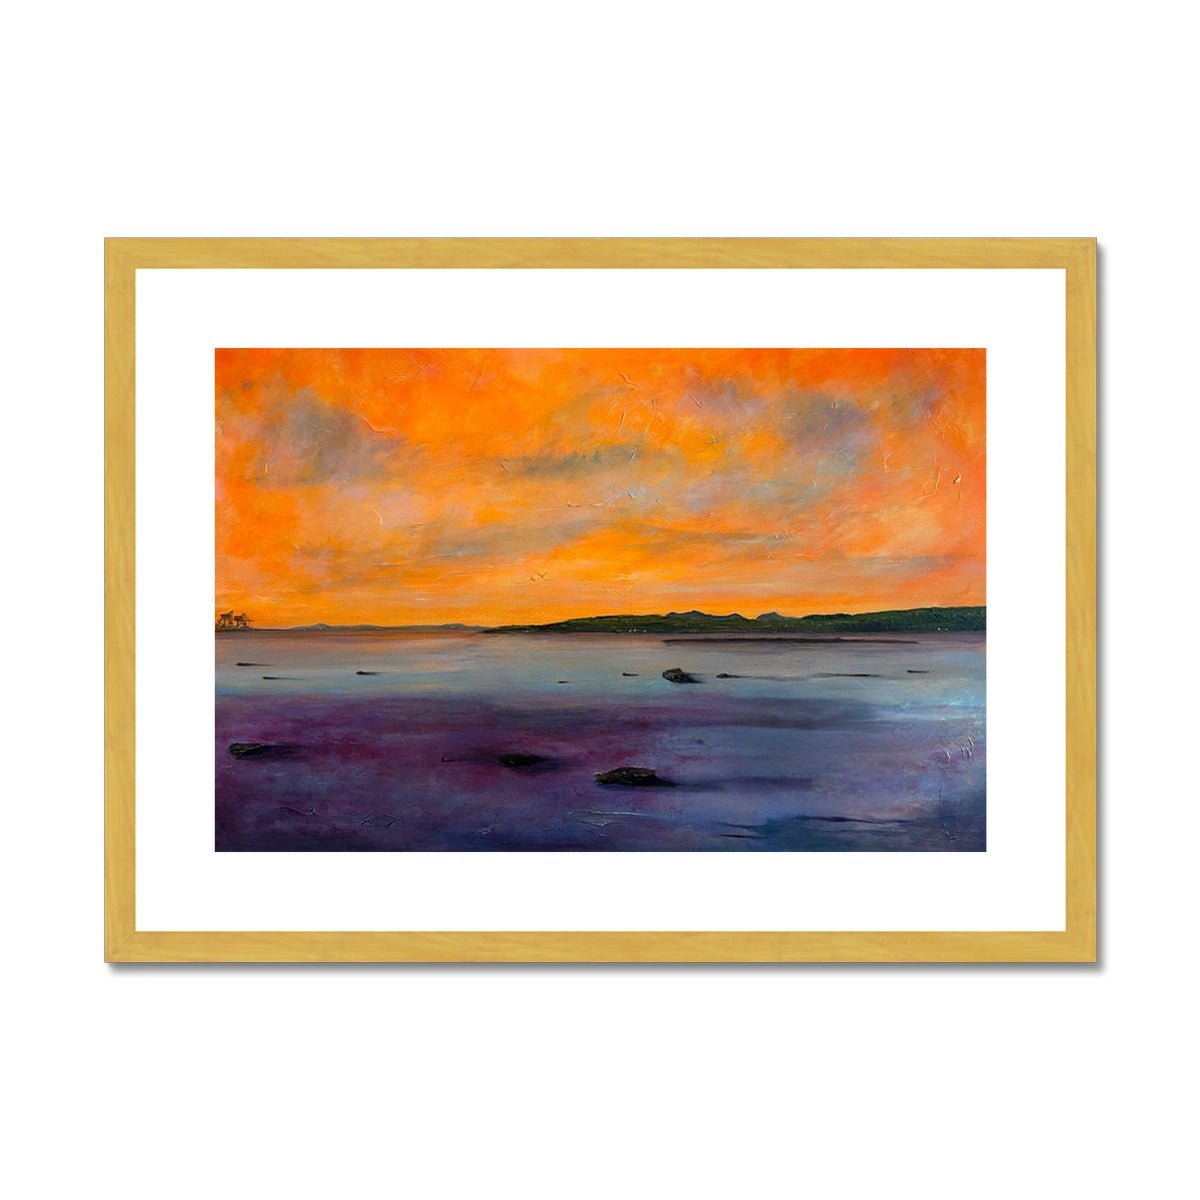 Looking From Largs Painting | Antique Framed & Mounted Prints From Scotland-Antique Framed & Mounted Prints-River Clyde Art Gallery-A2 Landscape-Gold Frame-Paintings, Prints, Homeware, Art Gifts From Scotland By Scottish Artist Kevin Hunter